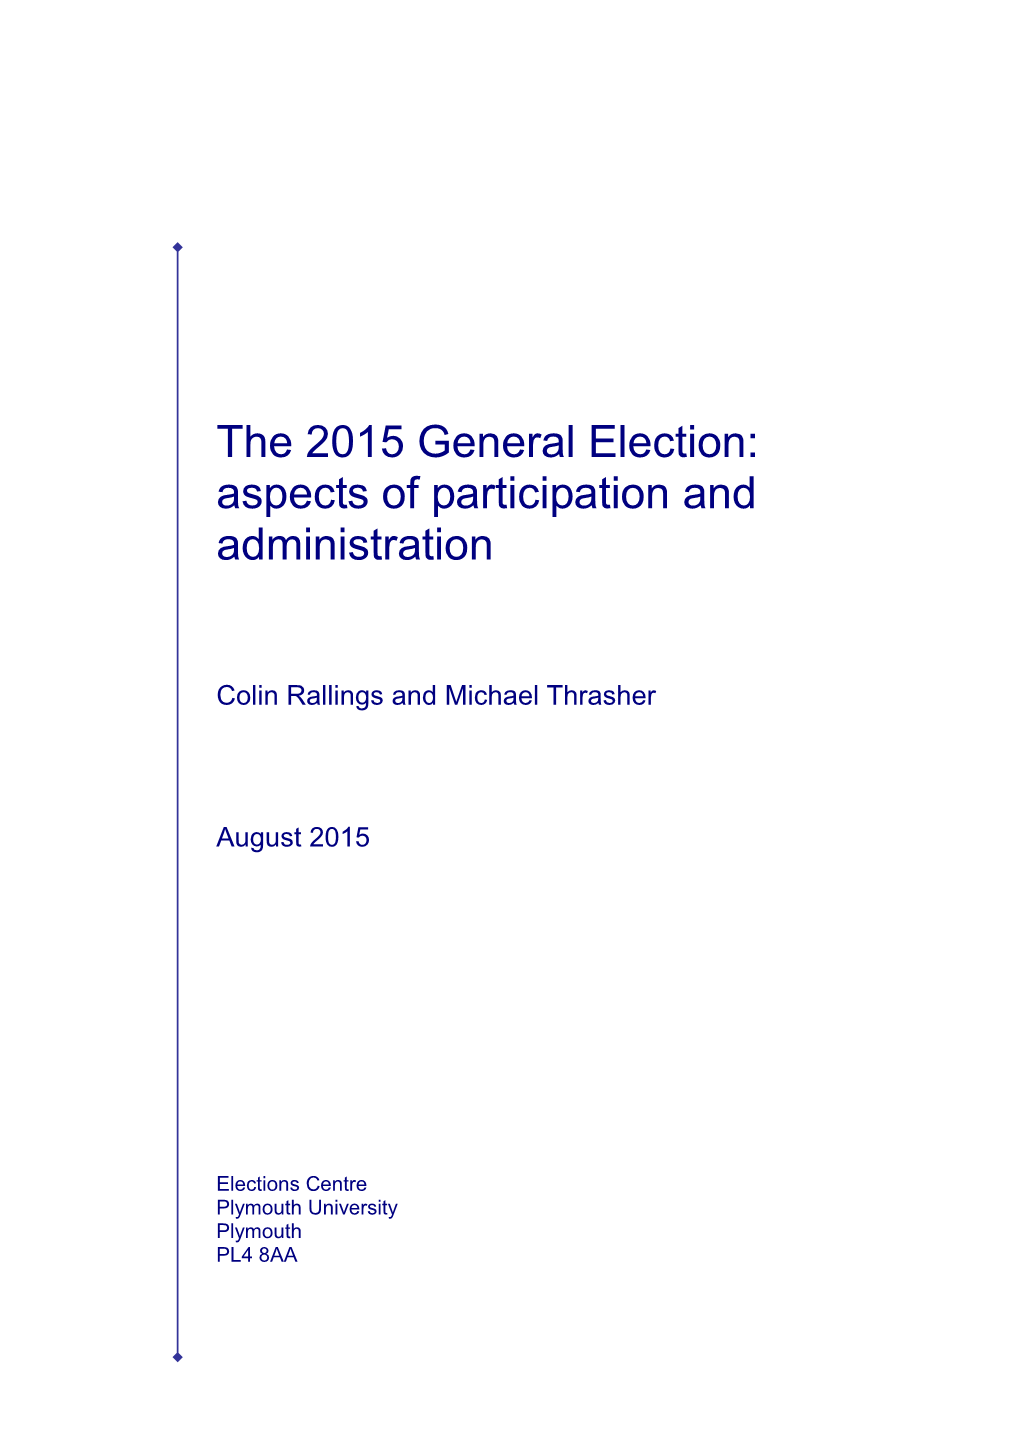 Plymouth University's Report on the 2015 UK Parliamentary Election